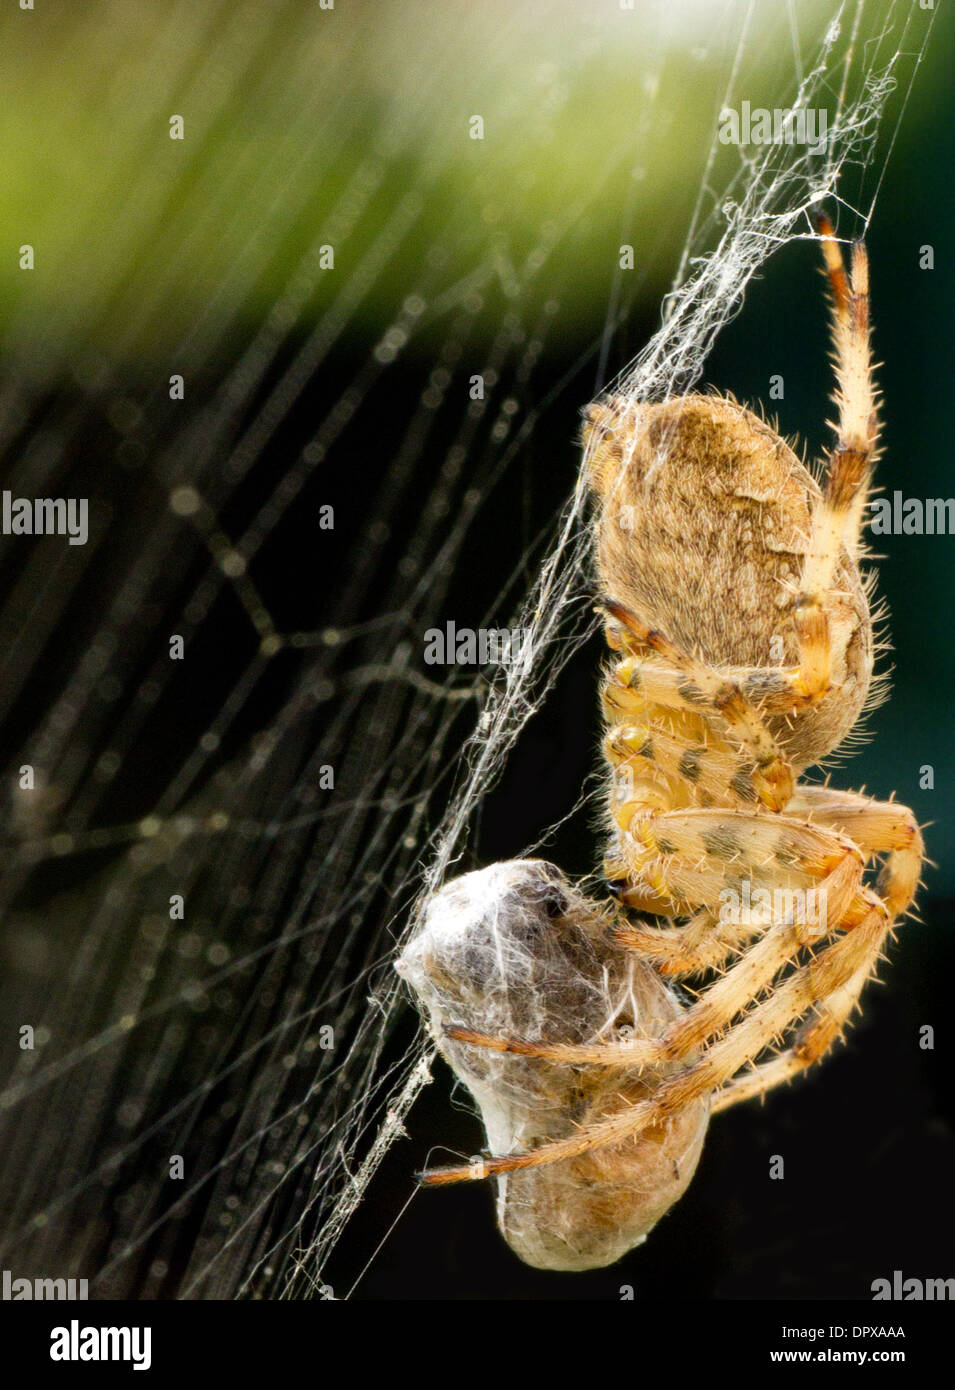 Spider with prey in a web, close up Stock Photo